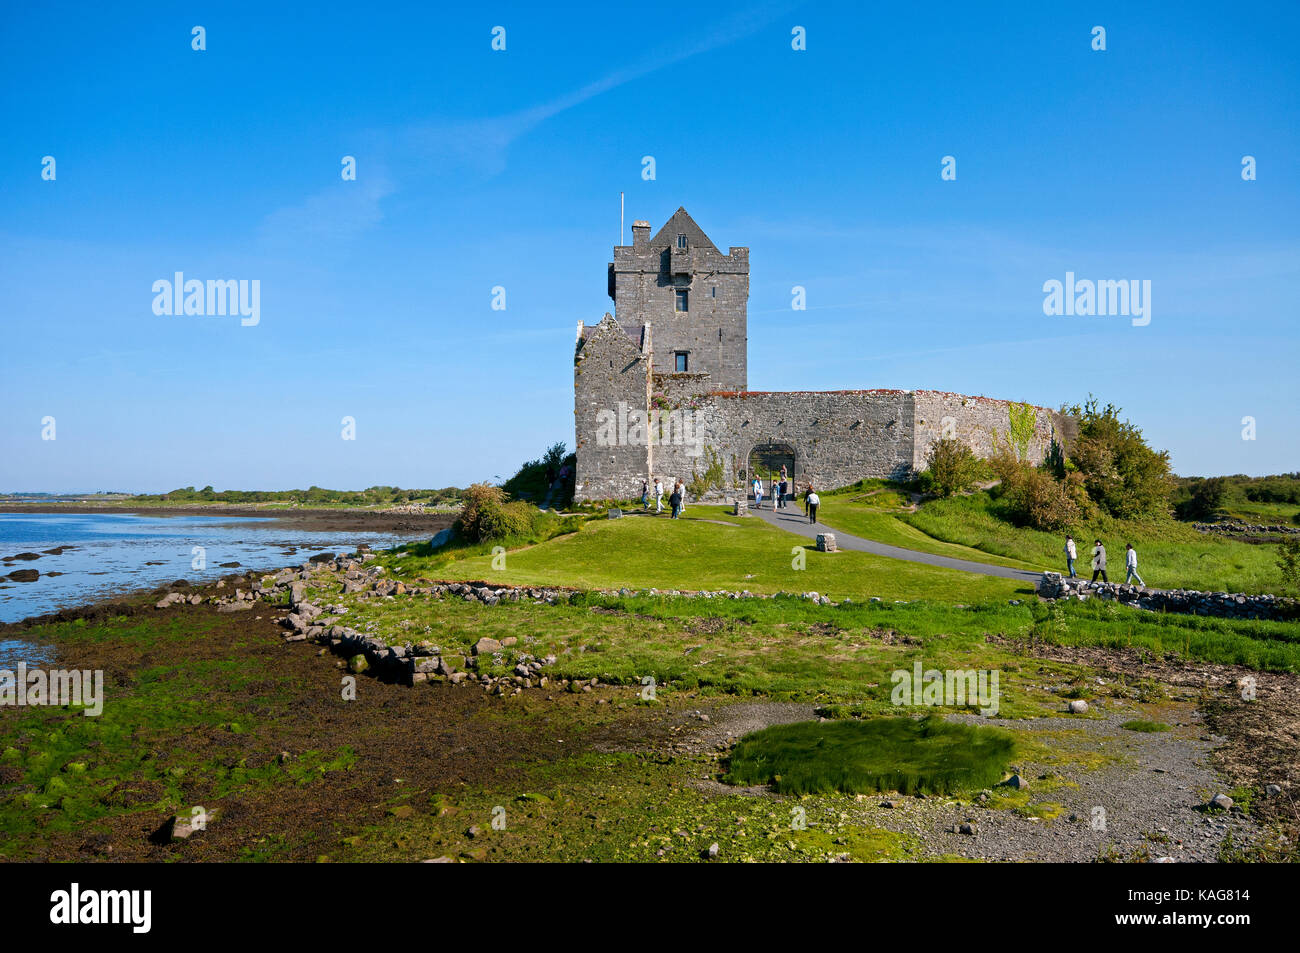 Dunguaire Castle Castle, Kinvarra, County Galway, Irland Stockfoto